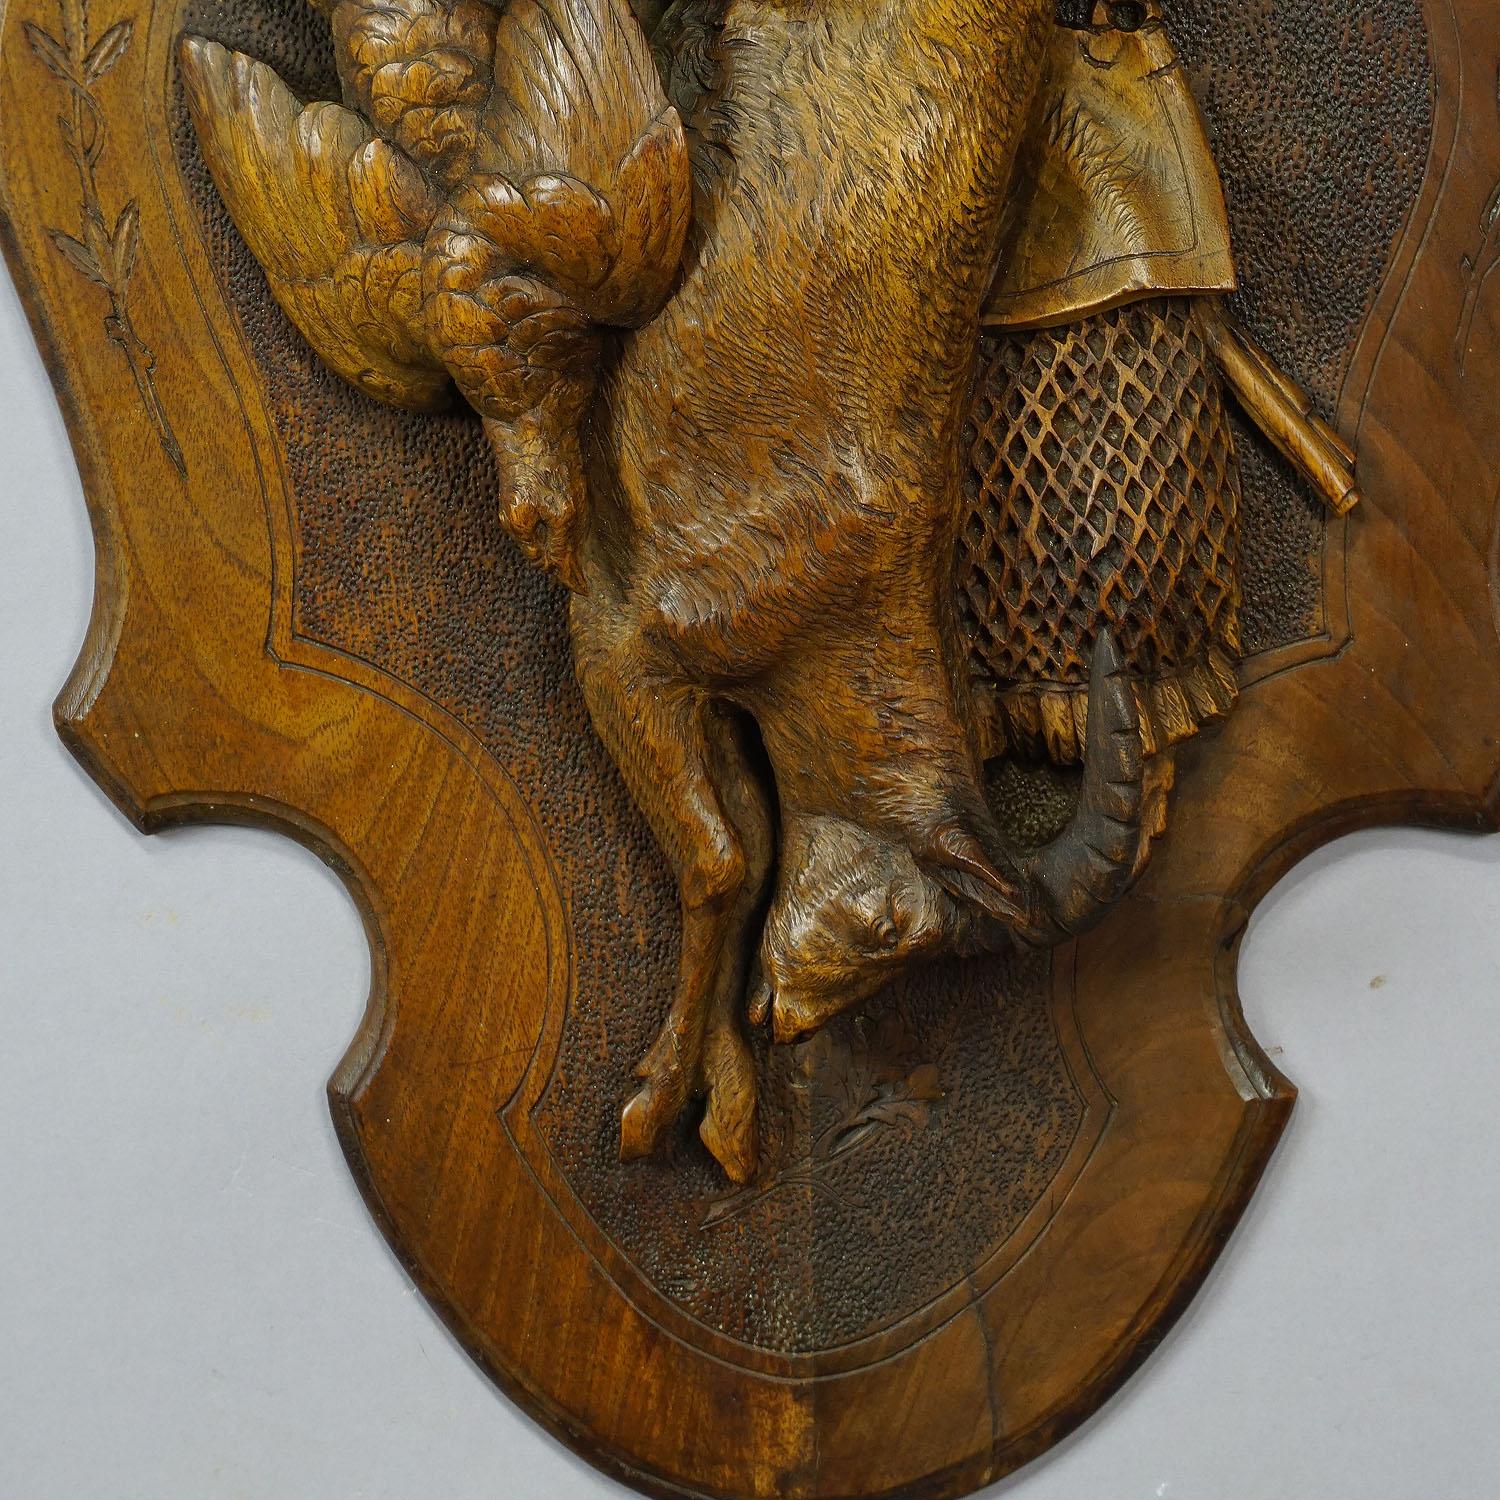 An antique wooden hunting game plaque with impressive carving of a ibex and partridge. Black Forest, executed circa 1900. Ibex Horn restored.

Measures: Width 14.17